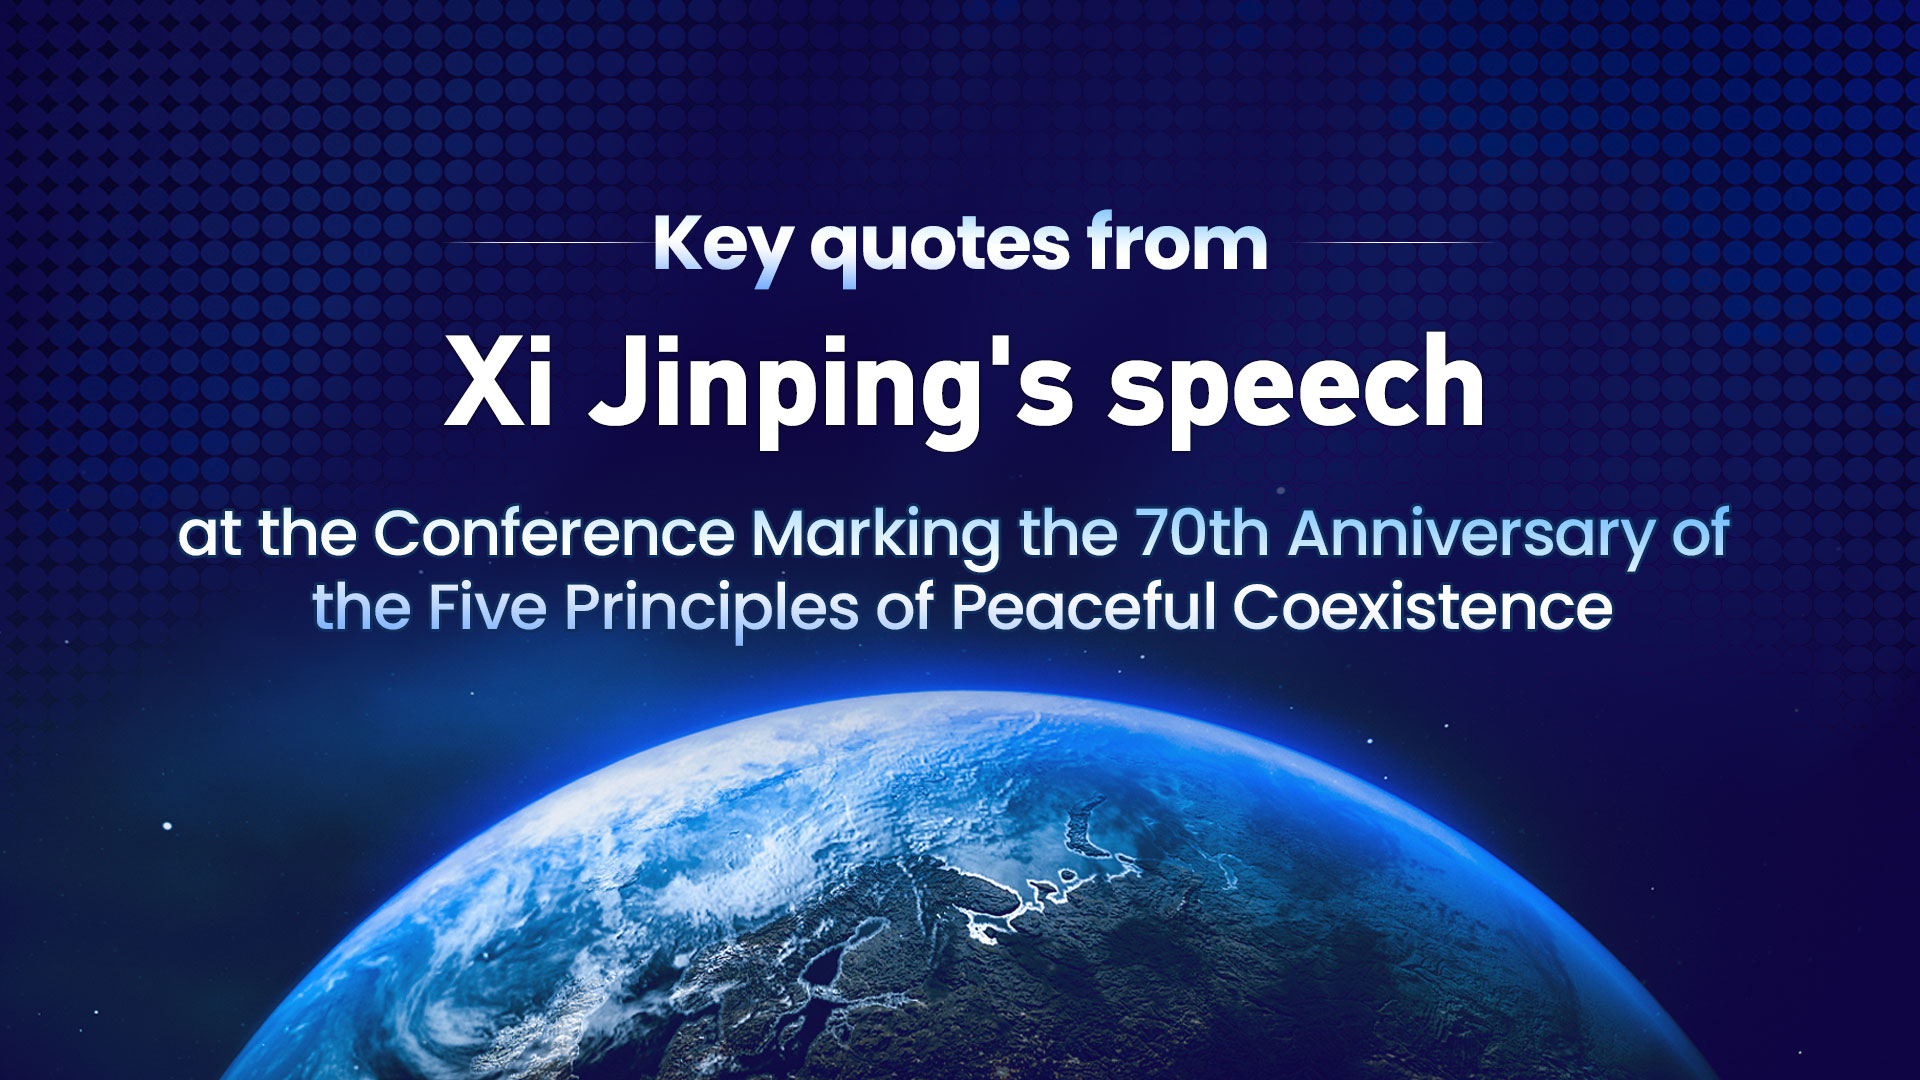 Xi's key quotes at Five Principles of Peaceful Coexistence conference